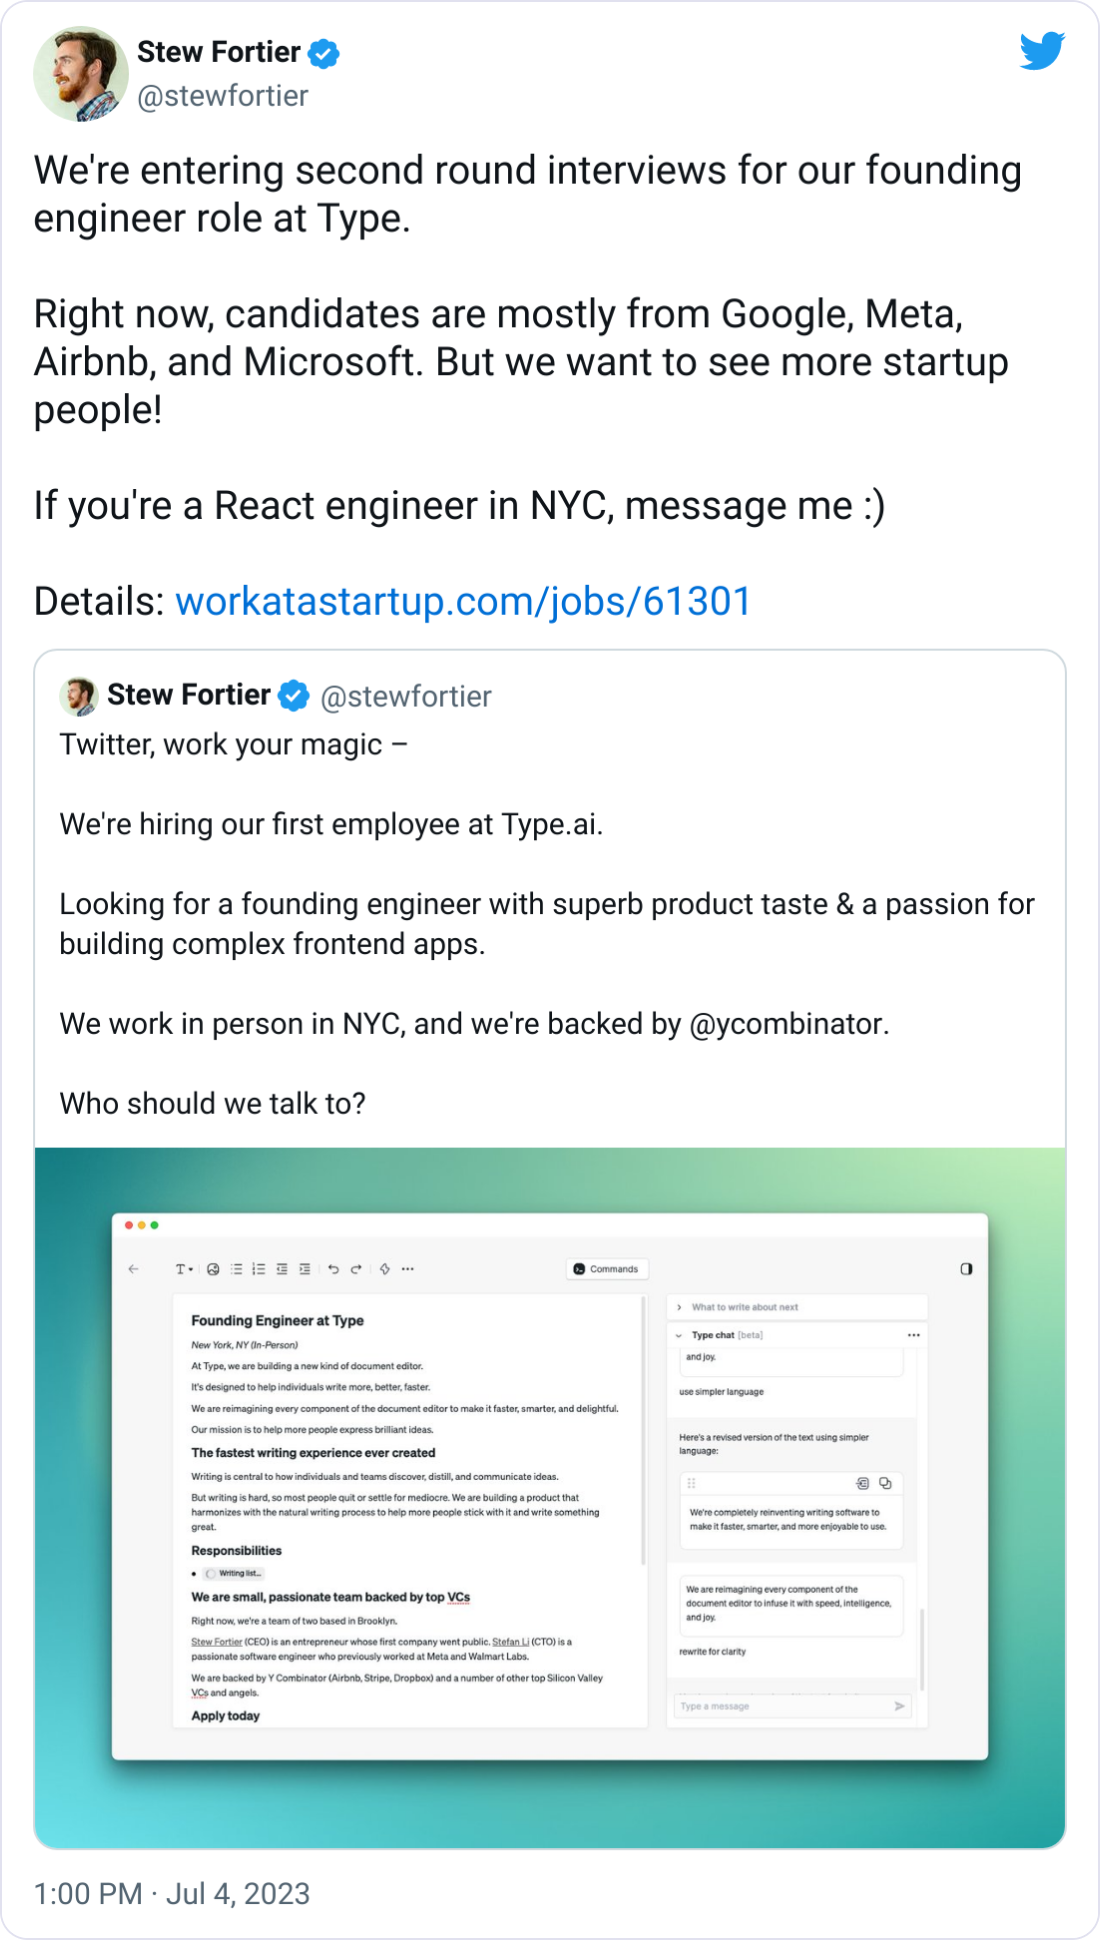 Stew Fortier @stewfortier We're entering second round interviews for our founding engineer role at Type.  Right now, candidates are mostly from Google, Meta, Airbnb, and Microsoft. But we want to see more startup people!   If you're a React engineer in NYC, message me :)  Details: https://workatastartup.com/jobs/61301